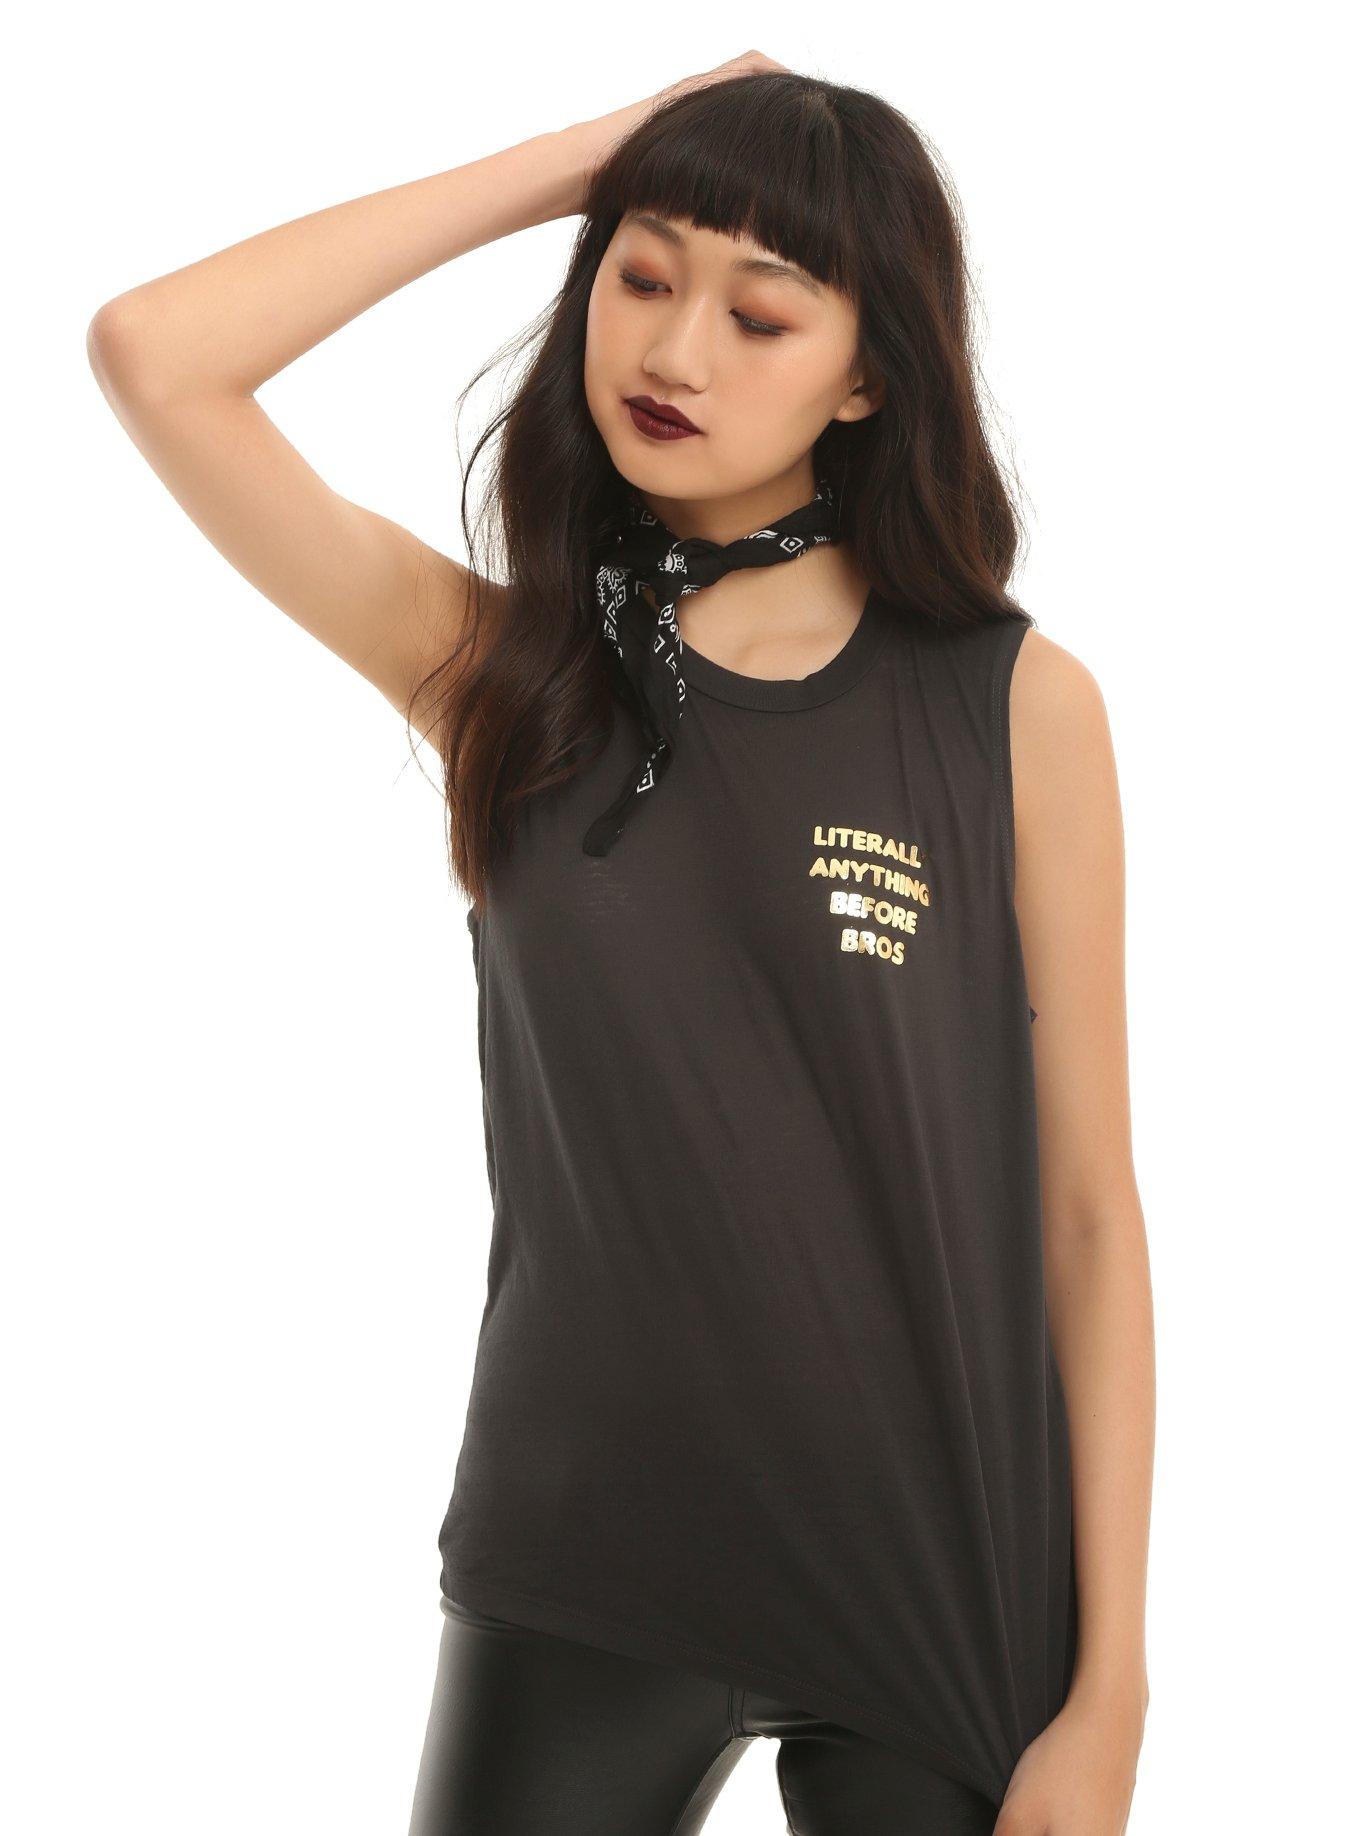 Literally Anything Before Bros Girls Muscle Top, BLACK, hi-res